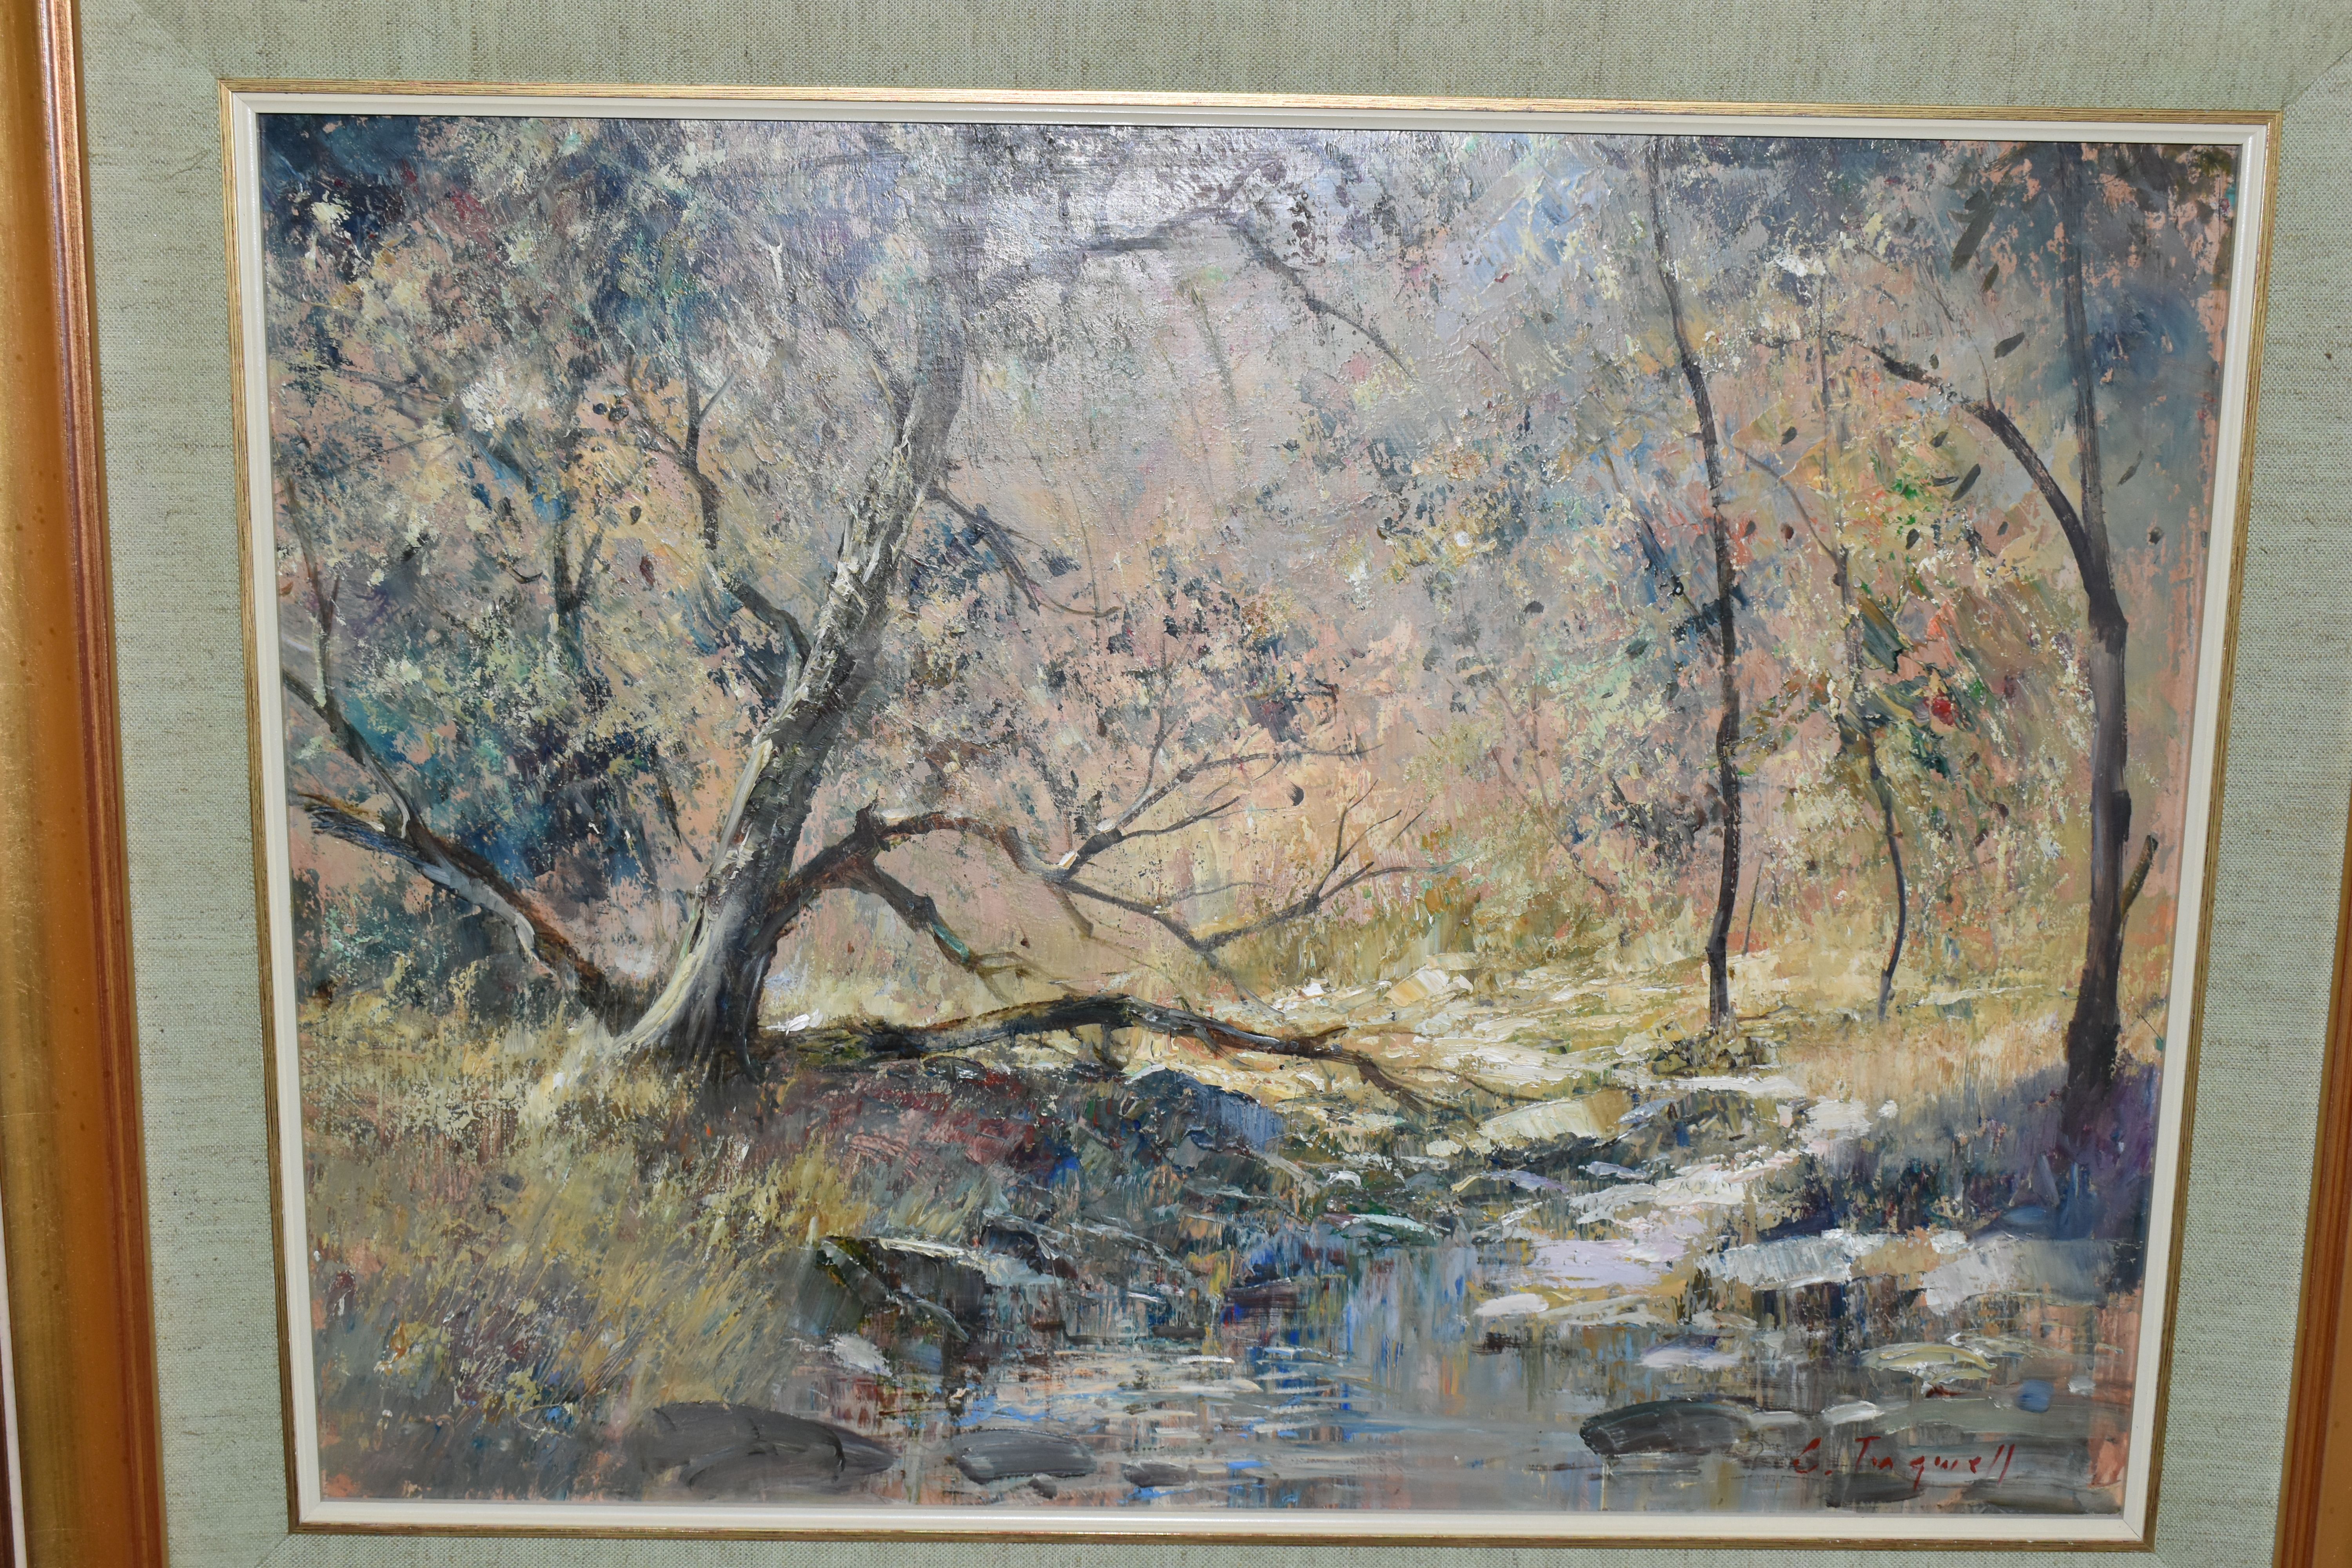 CHRISTOPHER TUGWELL (SOUTH AFRICA 1938-2021) AN IMPRESSIONST STYLE LANDSCAPE, a small stream cuts - Image 2 of 4